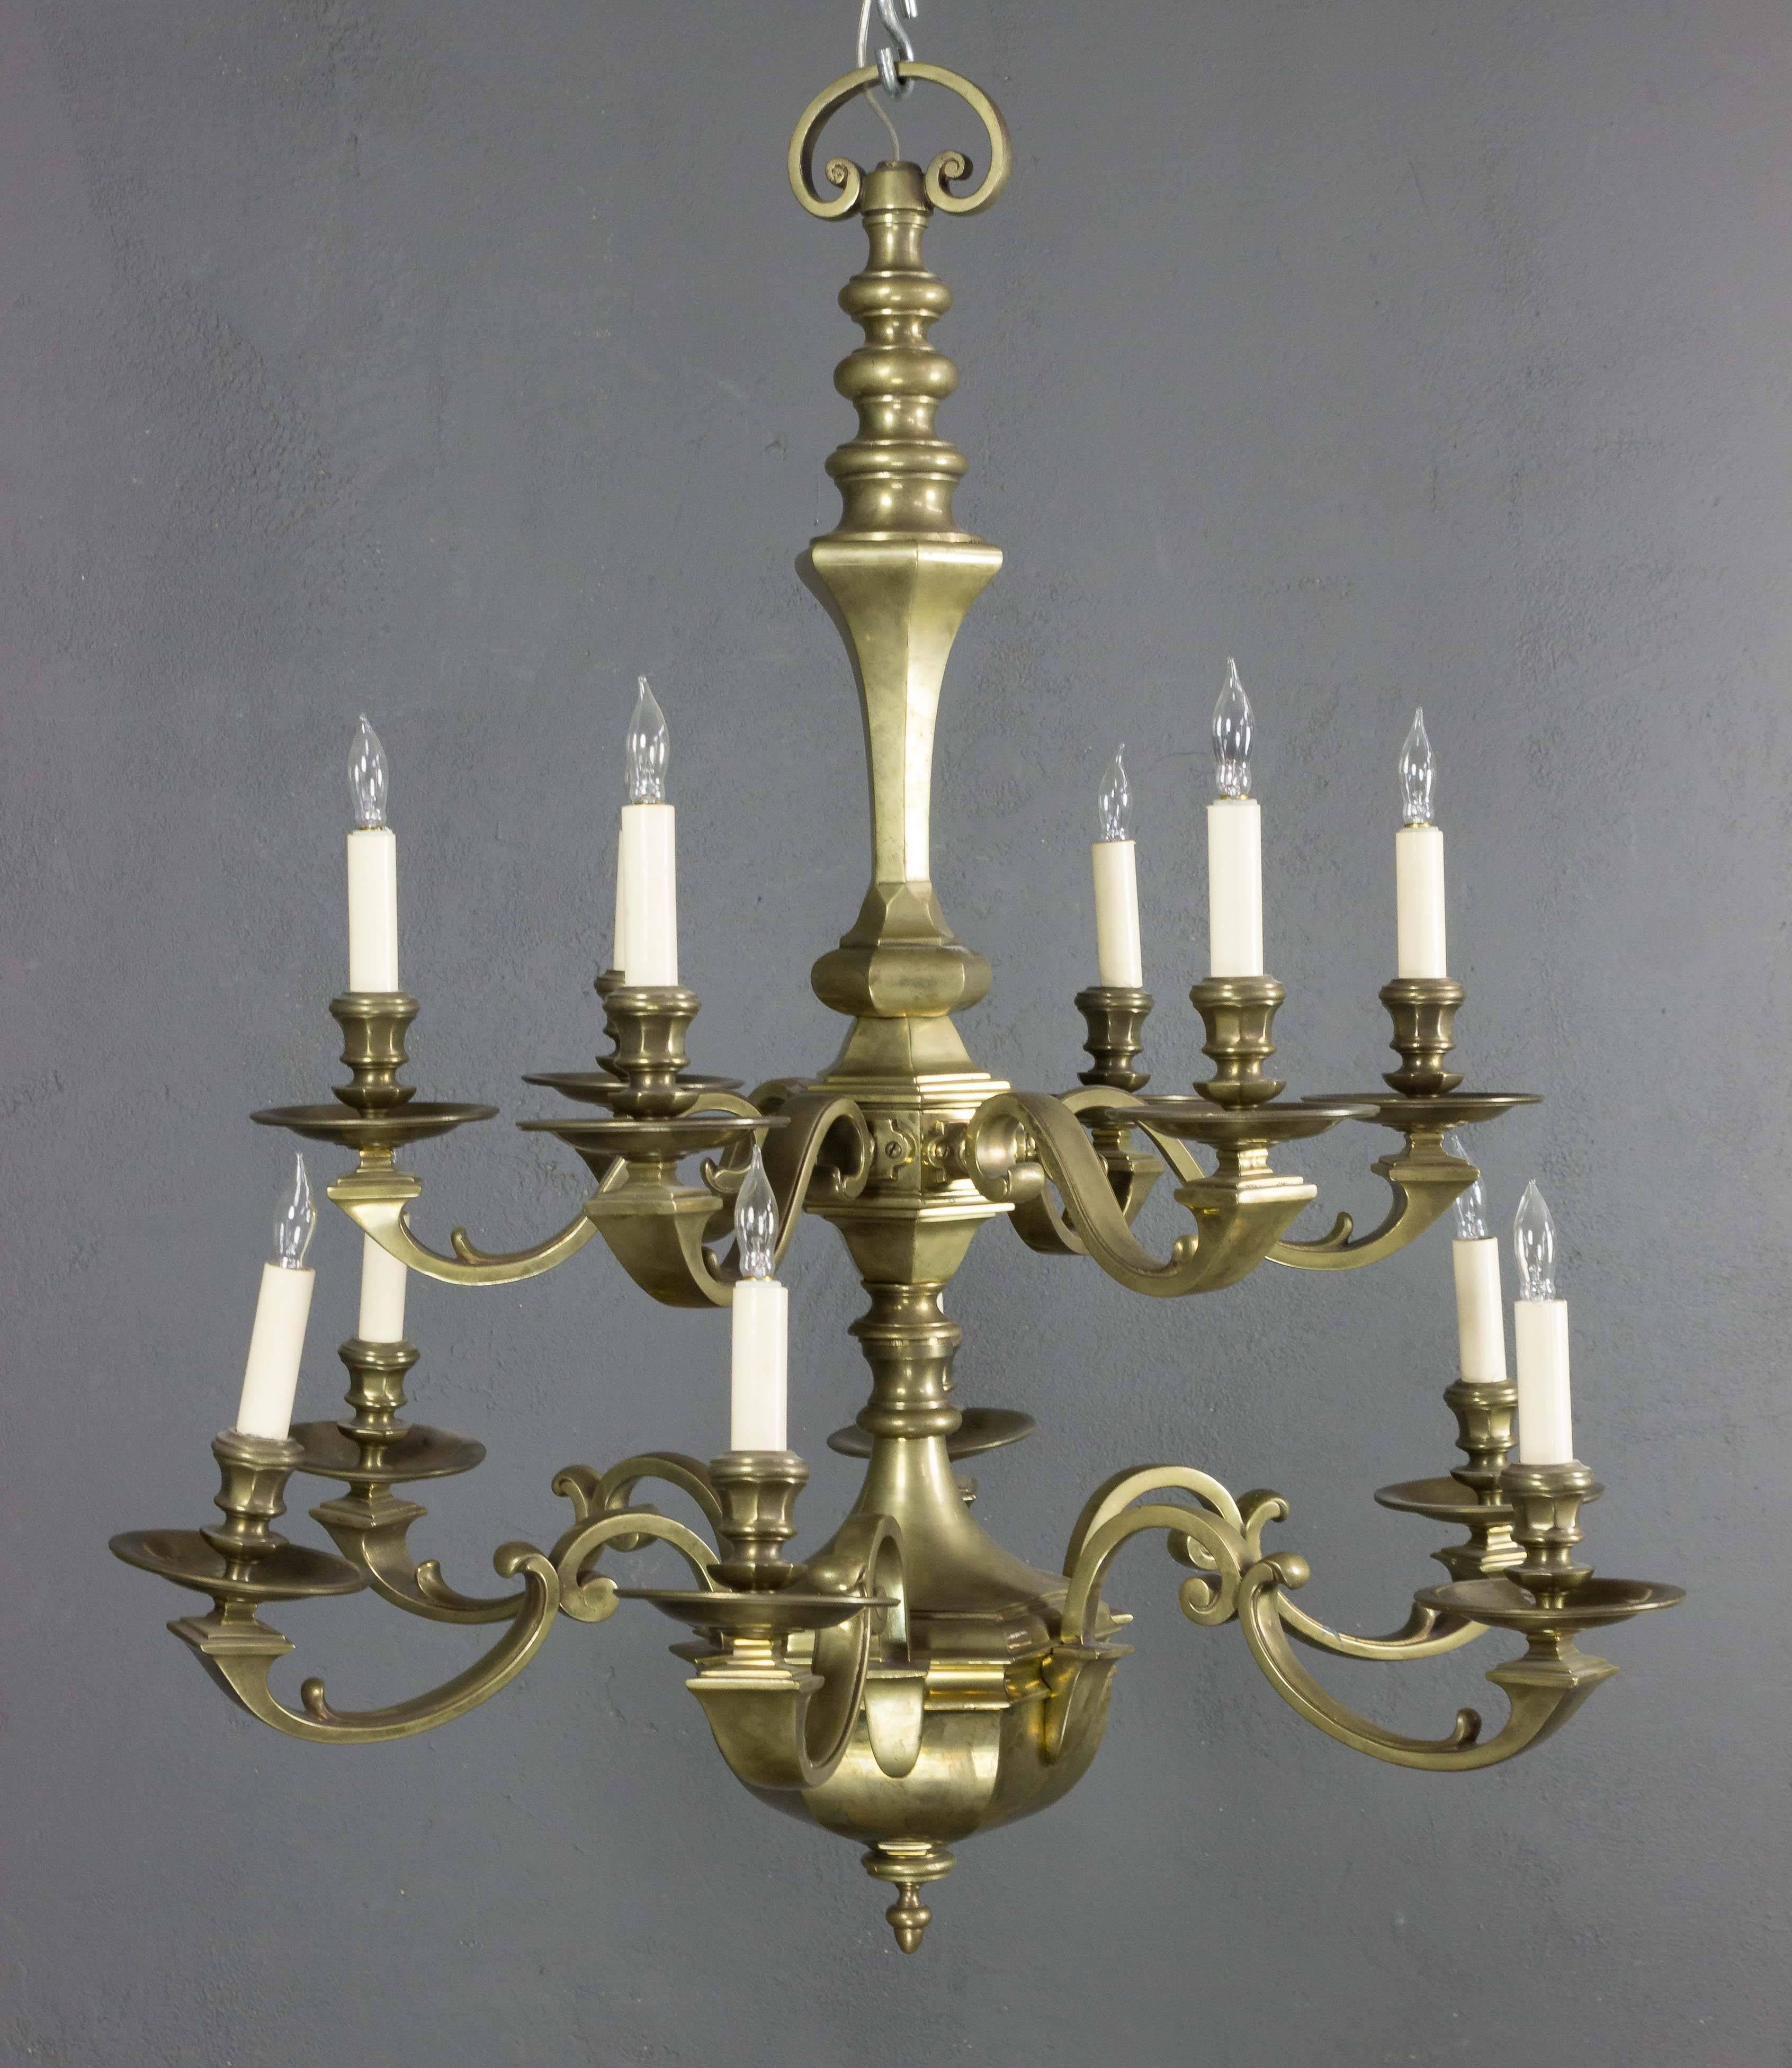 This stunning French chandelier from the 1940s is a captivating blend of bronze and metal. Designed in a neoclassical style, it features two tiers of lights with six arms on each tier, creating a striking visual impact. The vintage piece is in very